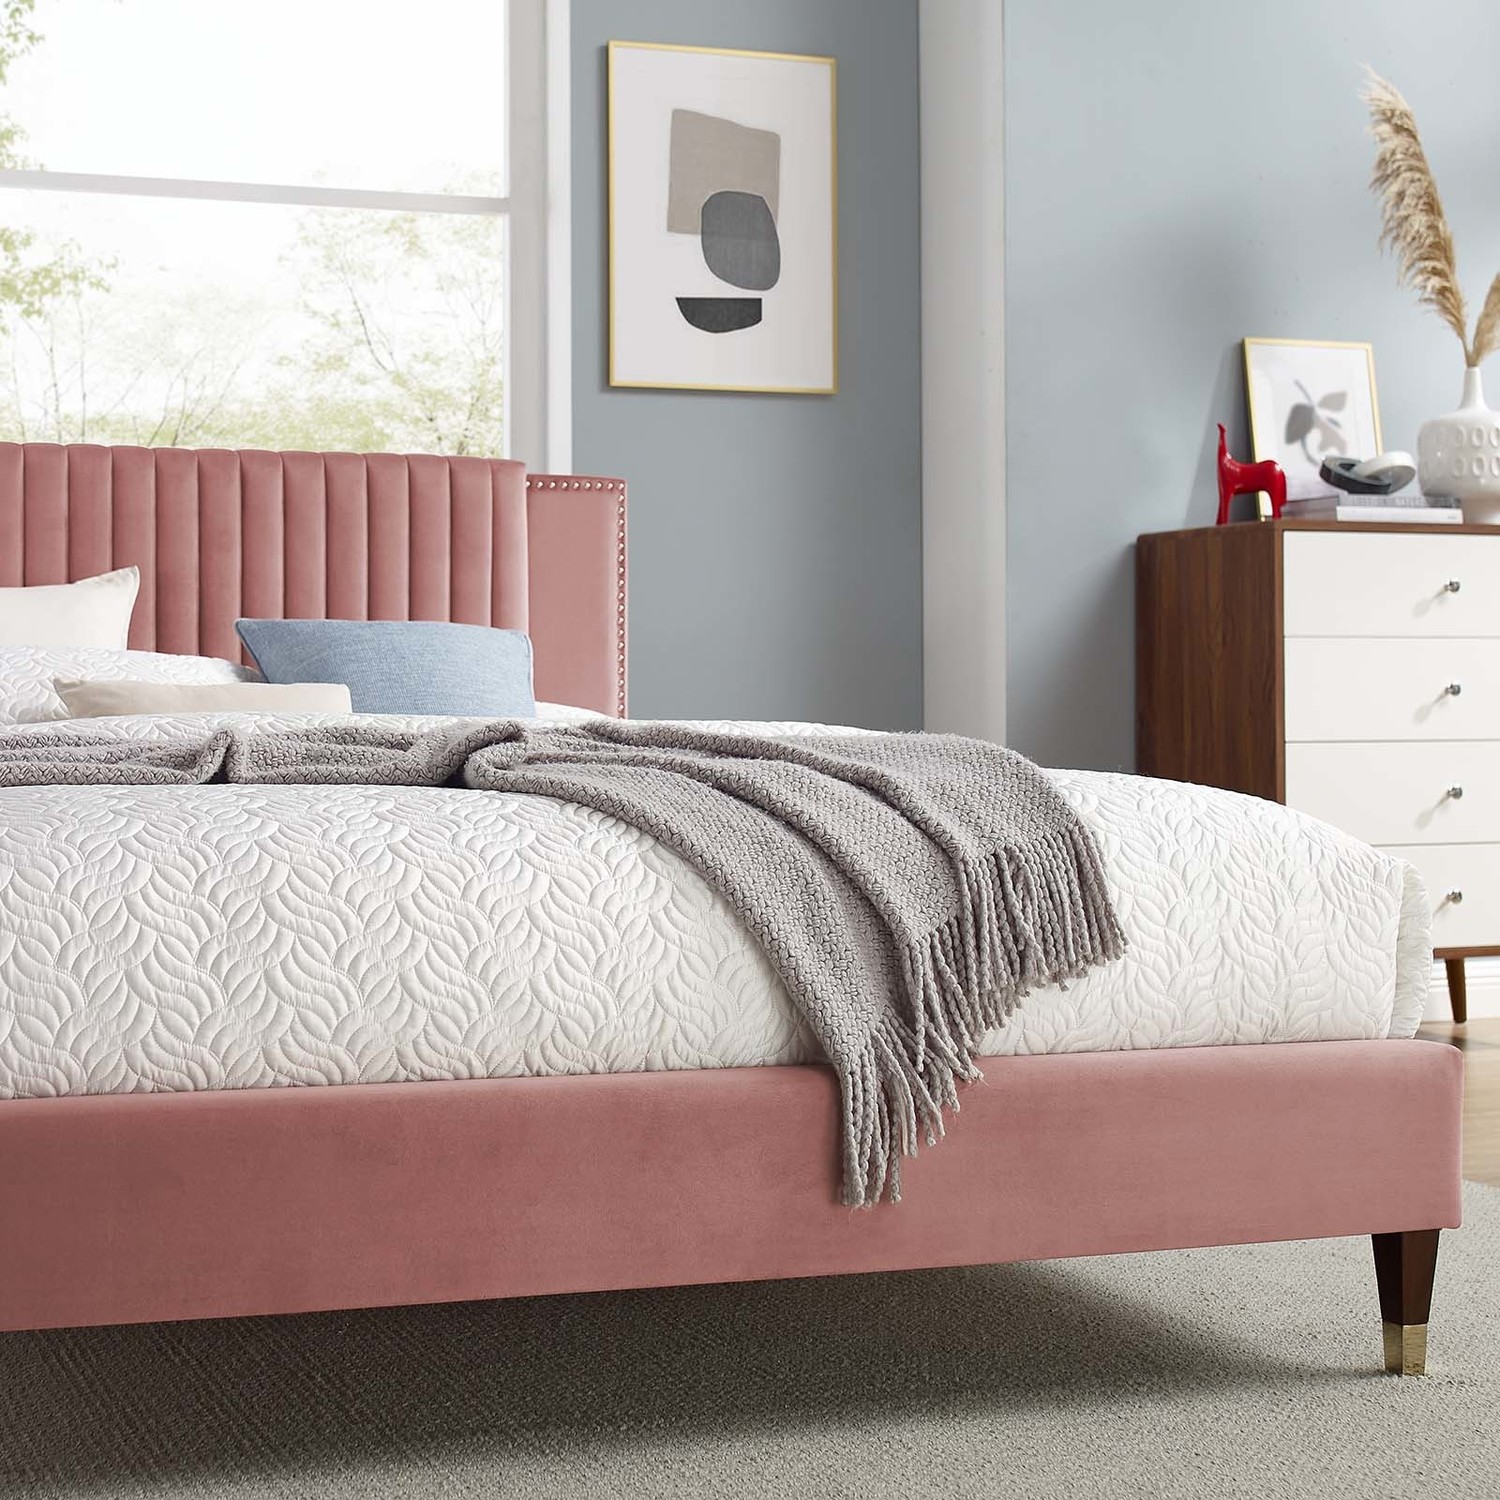 twin bed frame near me Modway Furniture Beds Dusty Rose